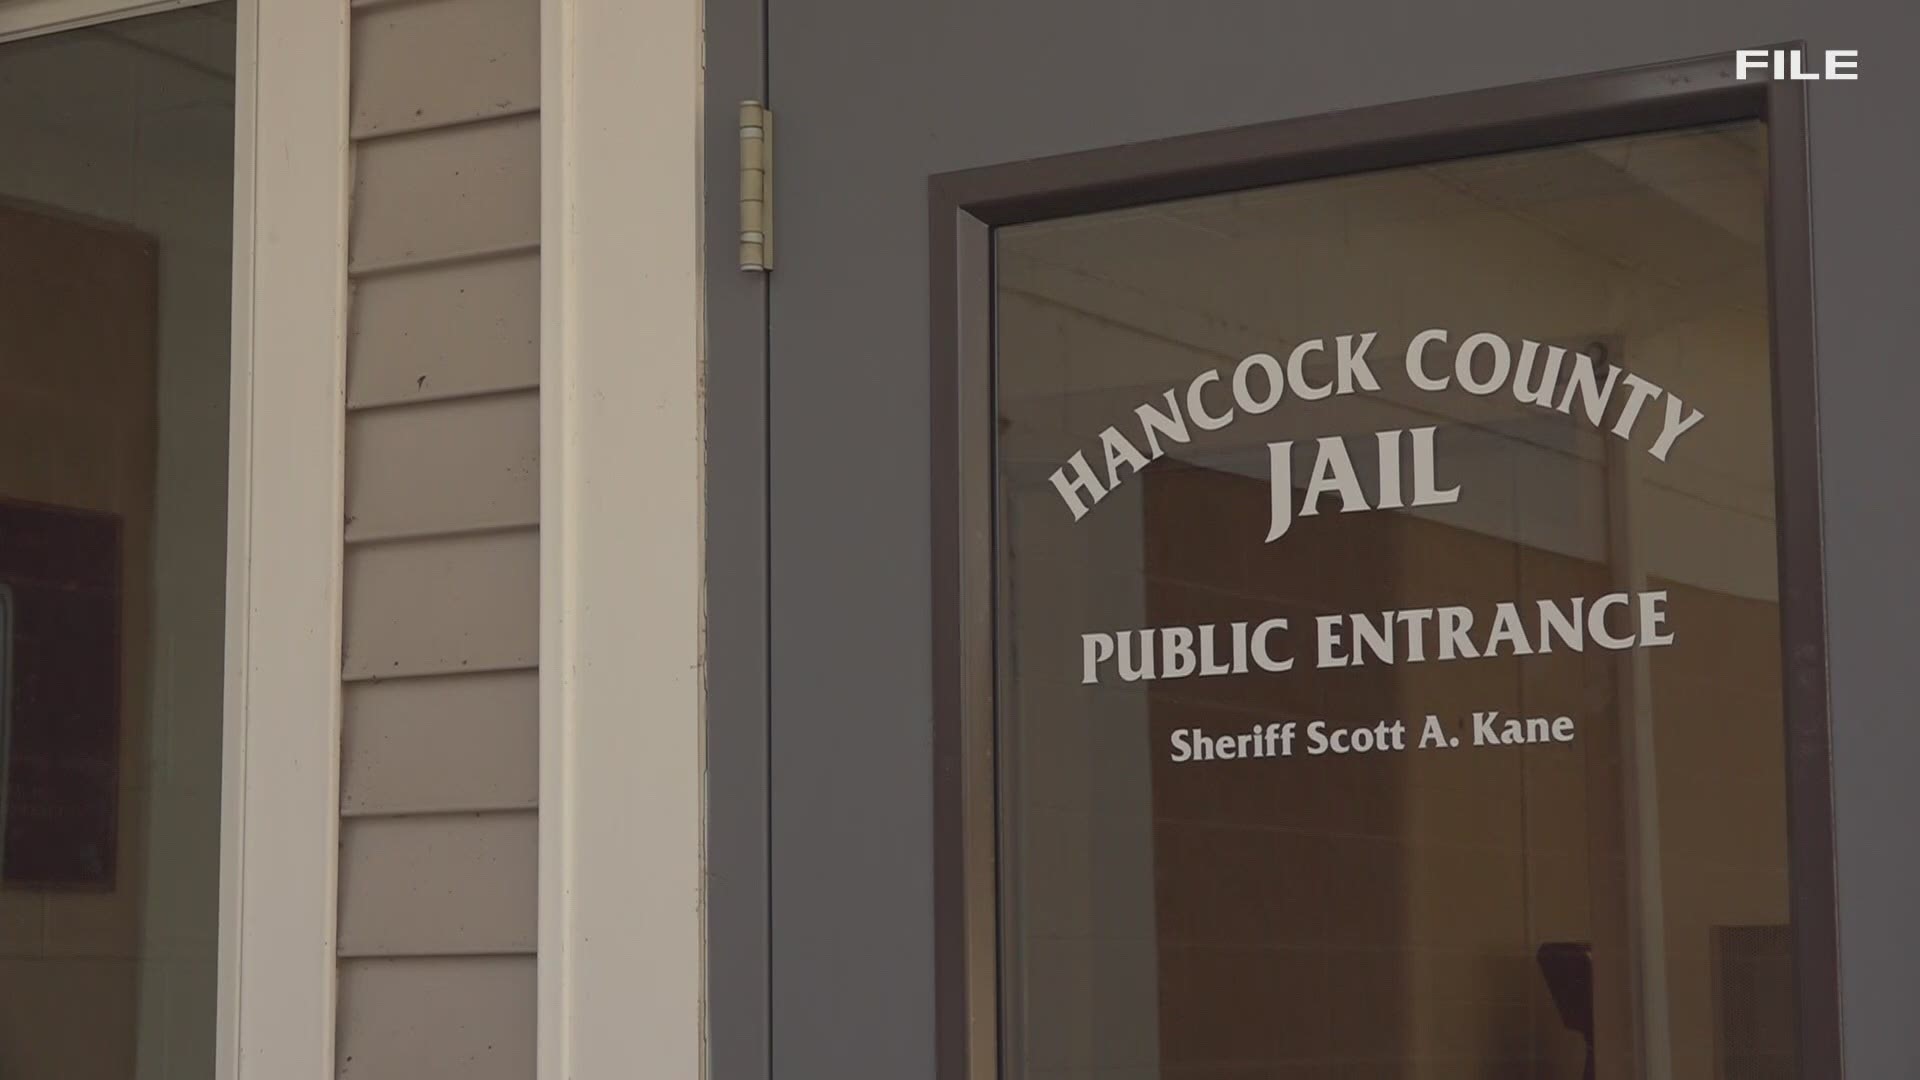 According to Hancock County Commissioner Chair, Healthy Acadia's recovery coaching will be provided to inmates in the Hancock County Jail at full capacity